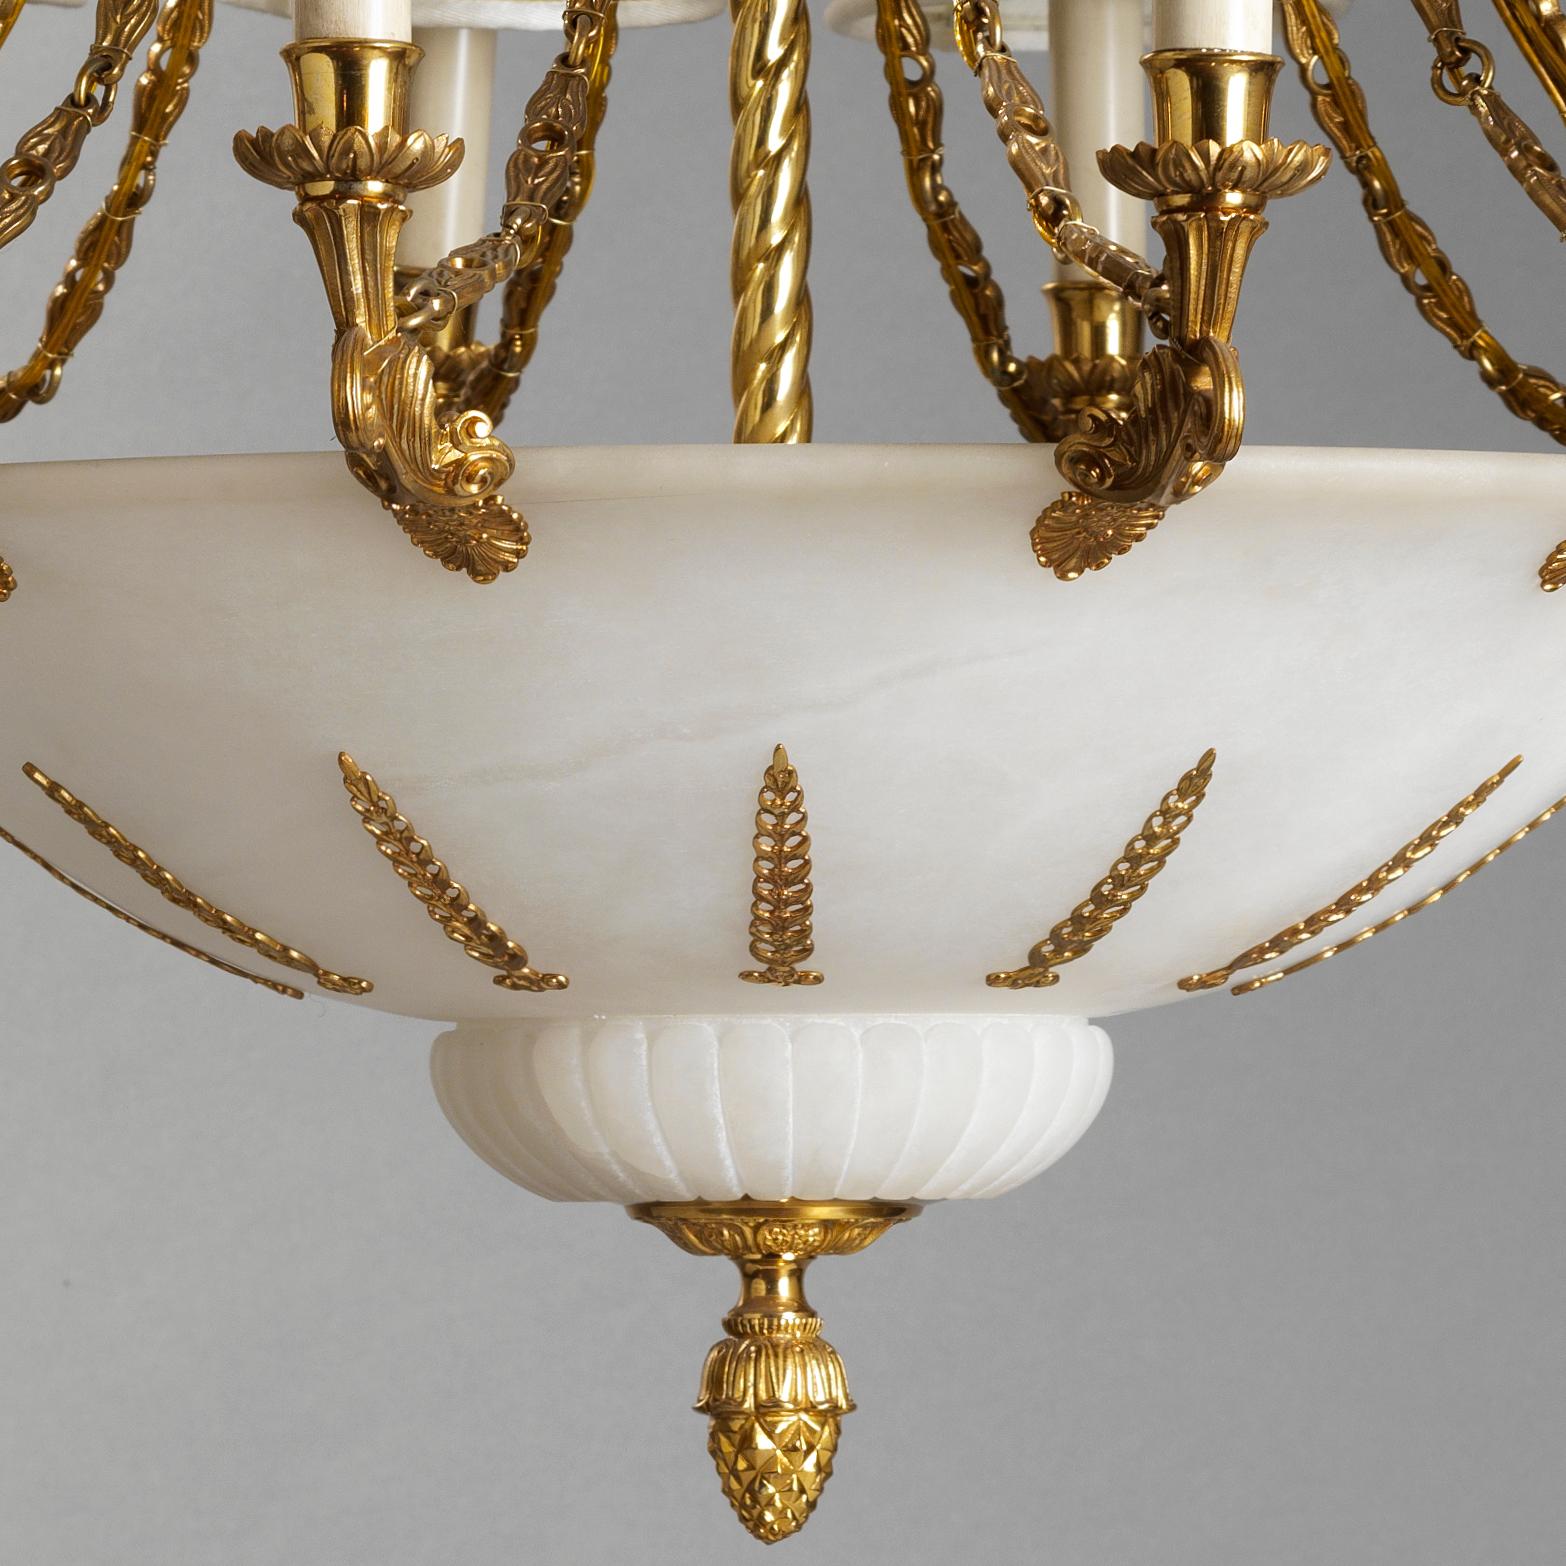 This French Empire Style Gilt Bronze and Alabaster Chandelier by Gherardo Degli Albizzi features best quality hand-chiseled details.
Top crowns in characterized by rich vegetal decoration with acanthus leaves acroterion and alabaster. Below a